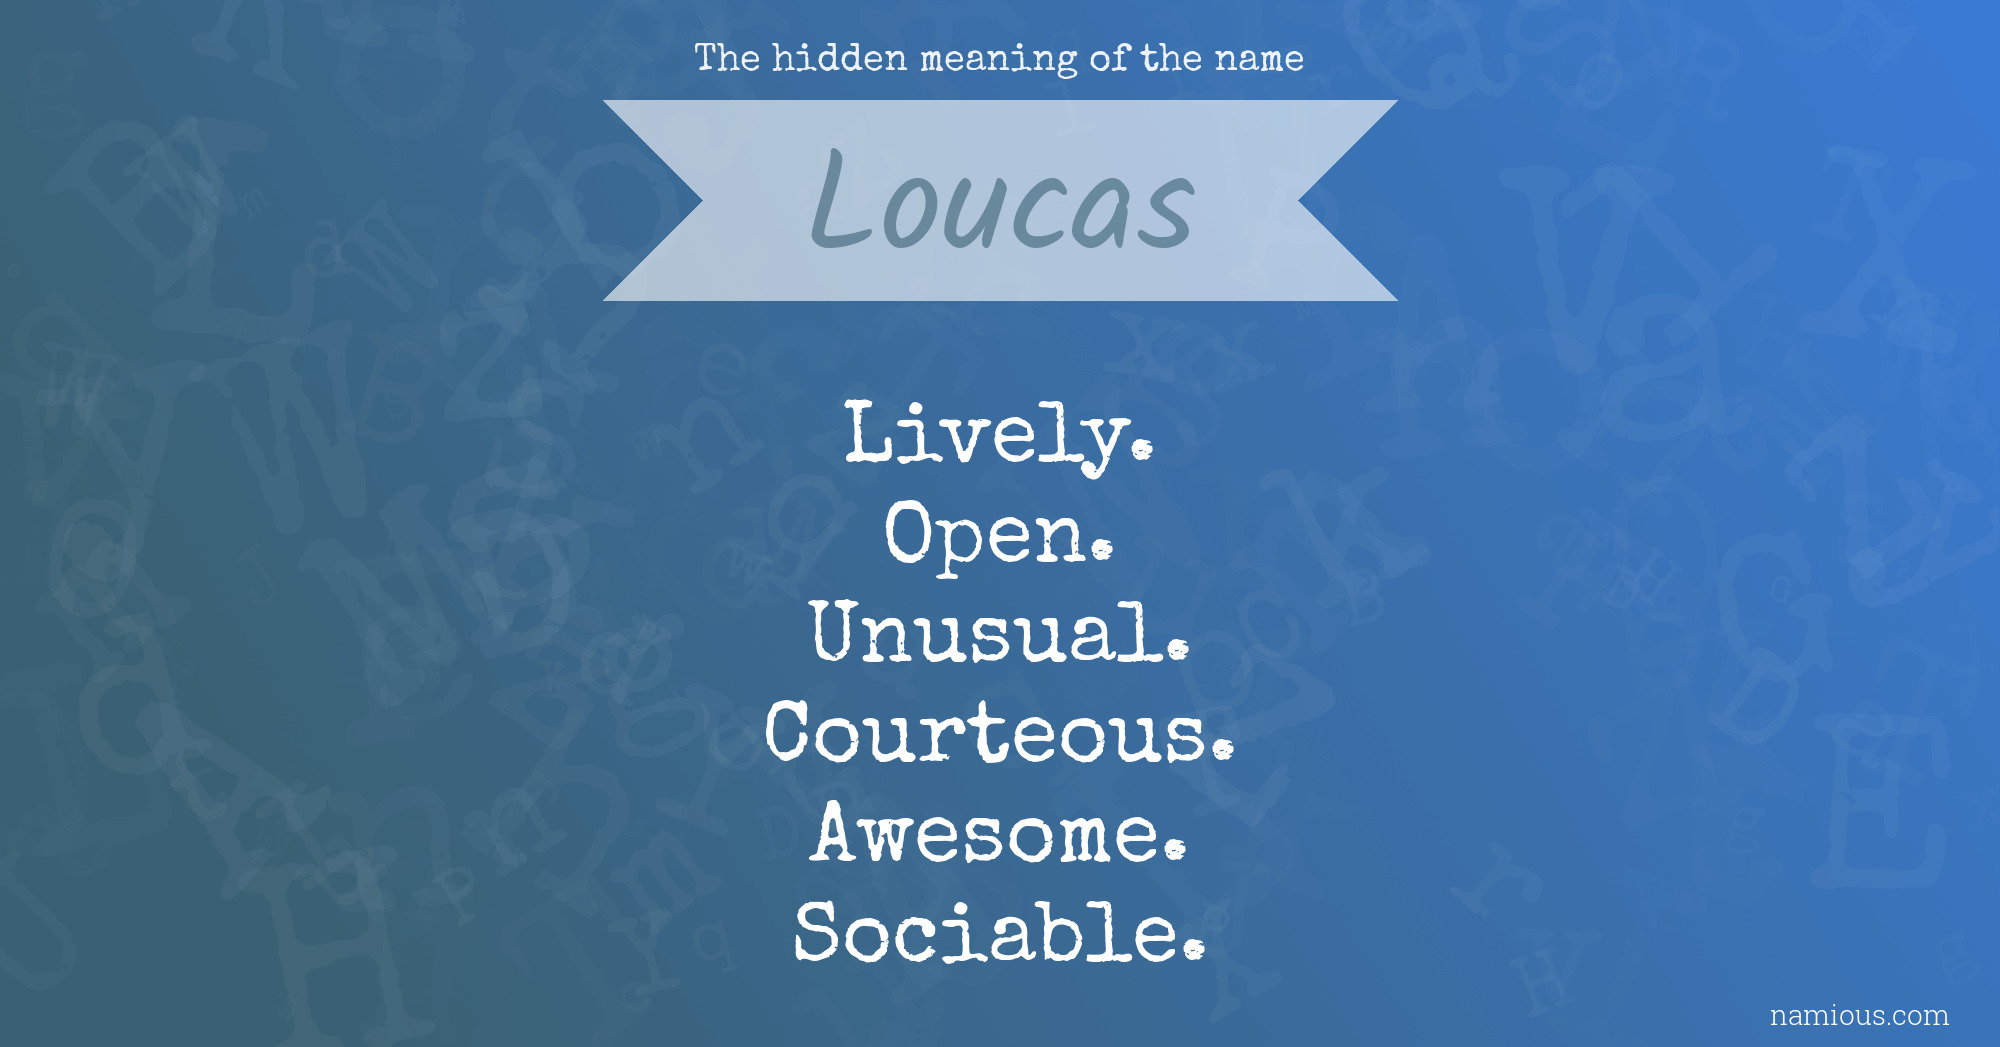 The hidden meaning of the name Loucas